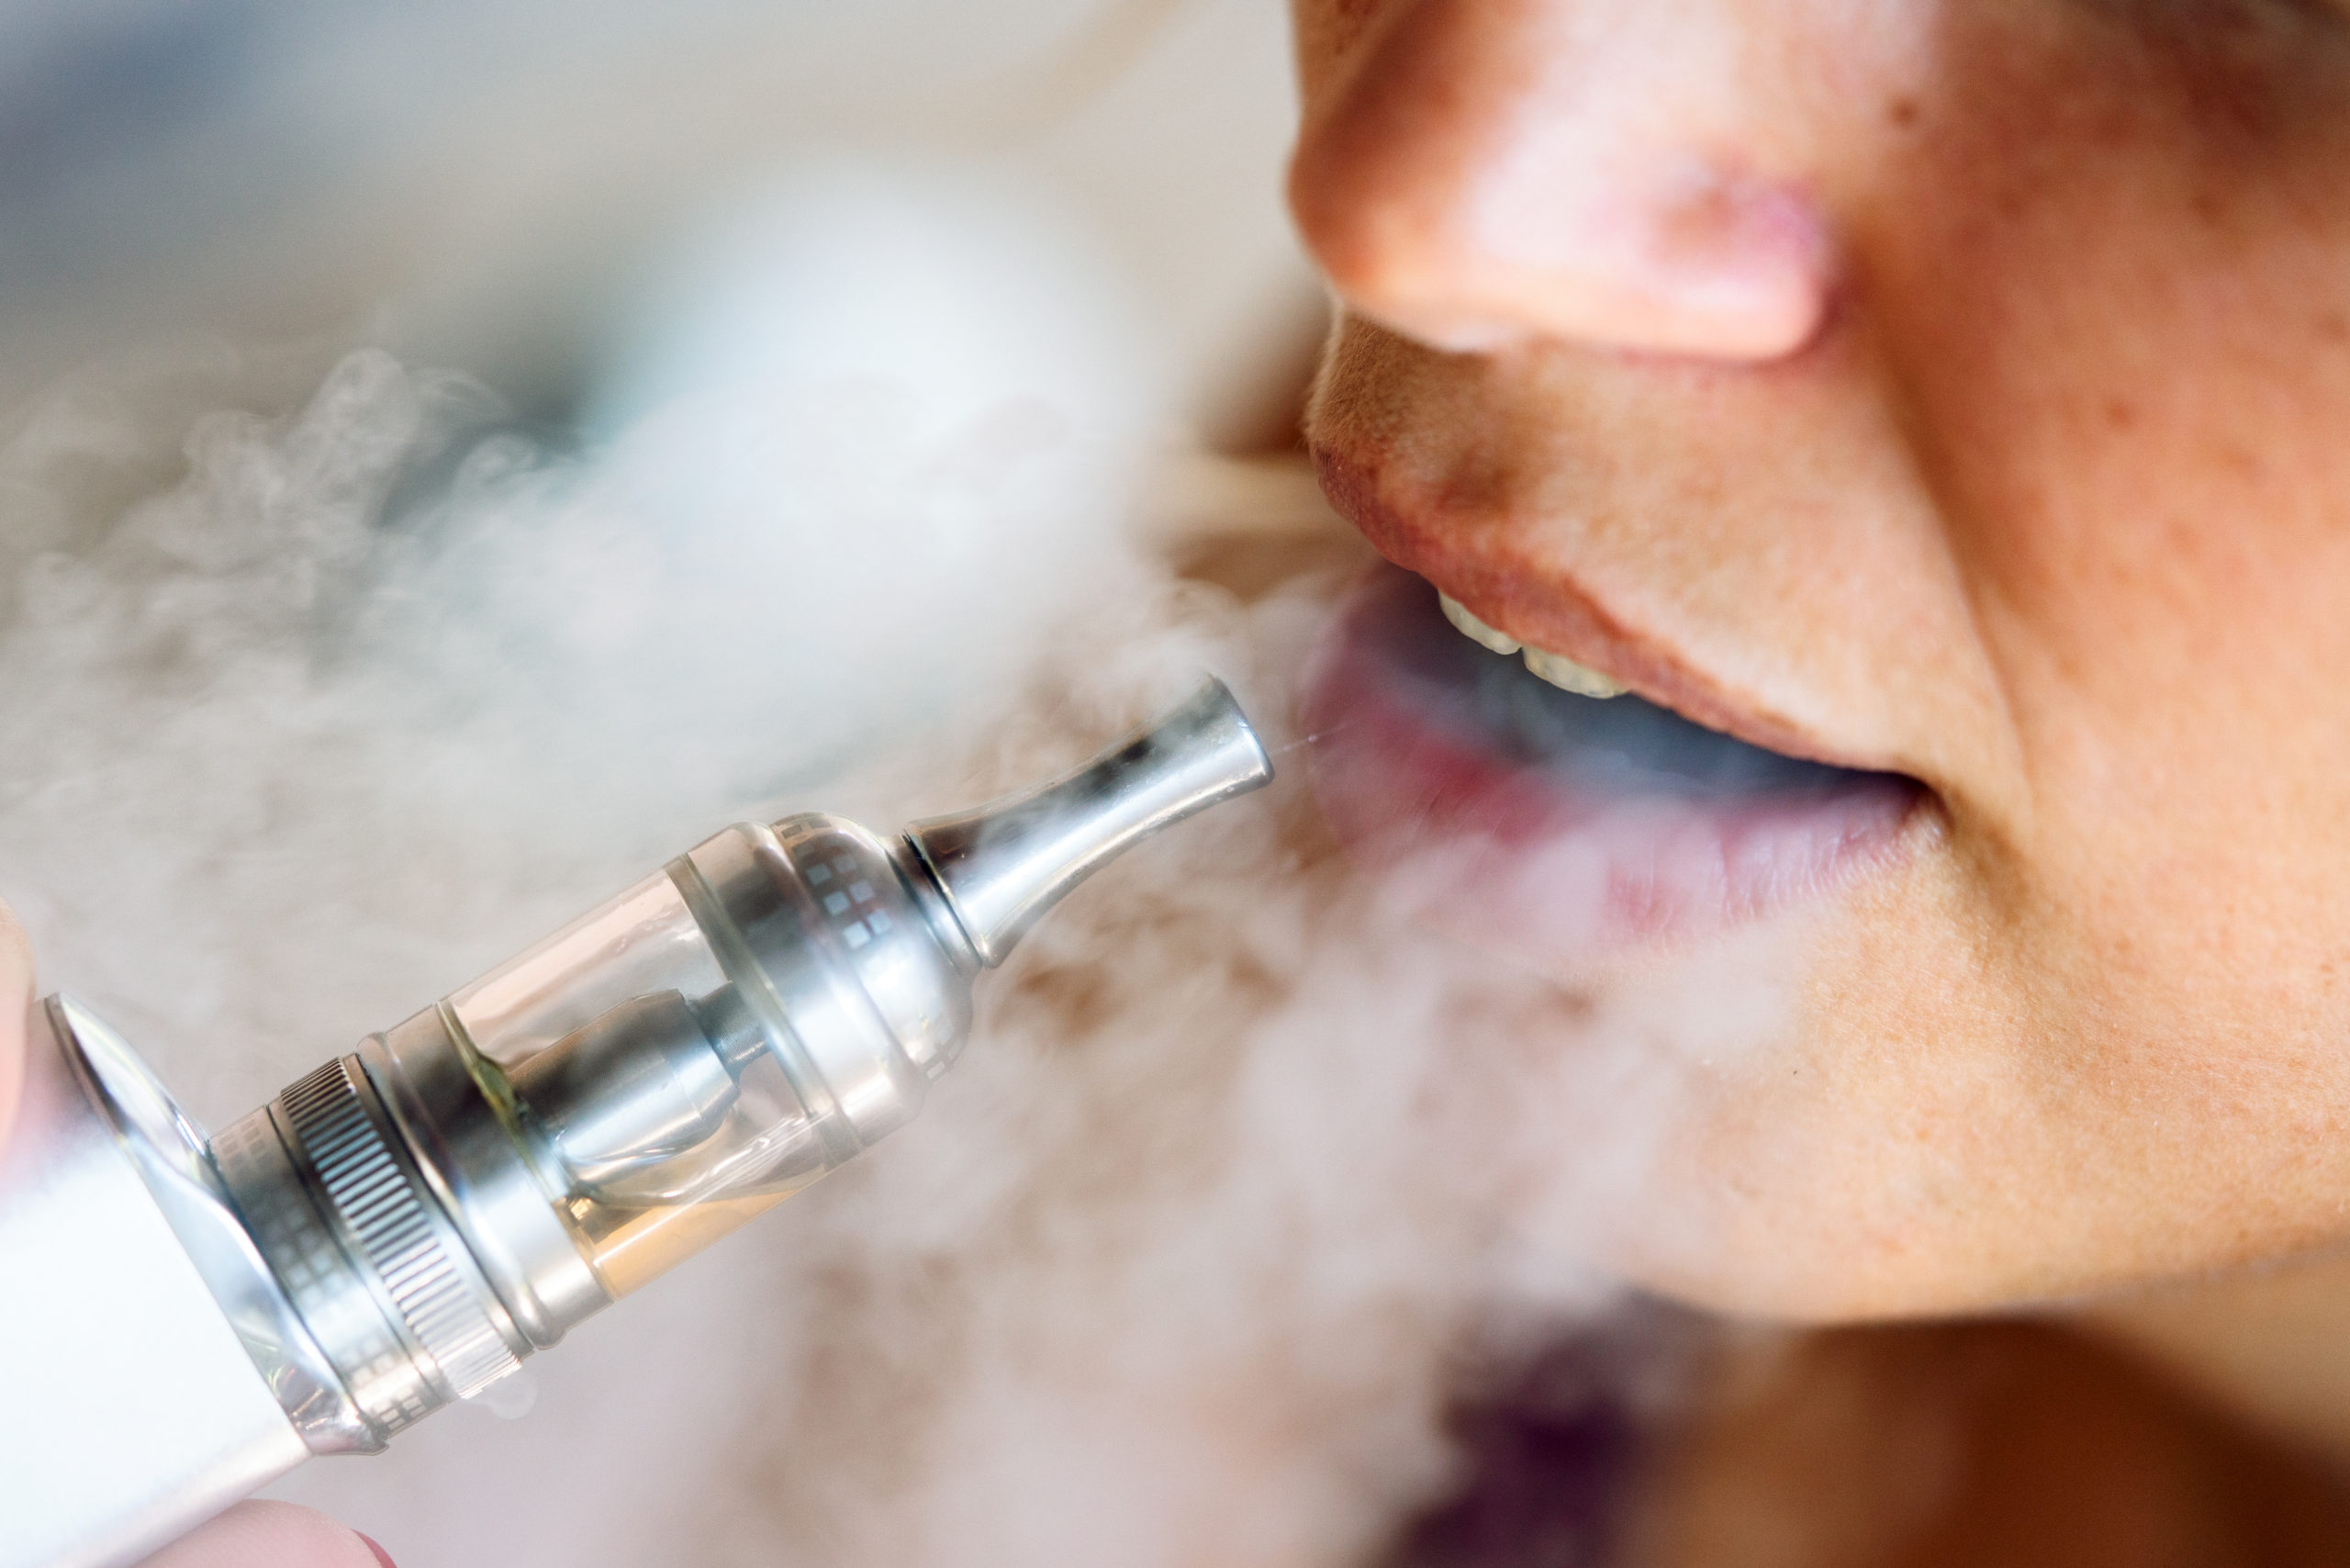 Smoking and vaping may be unhealthy and addictive and pose health risk to lungs